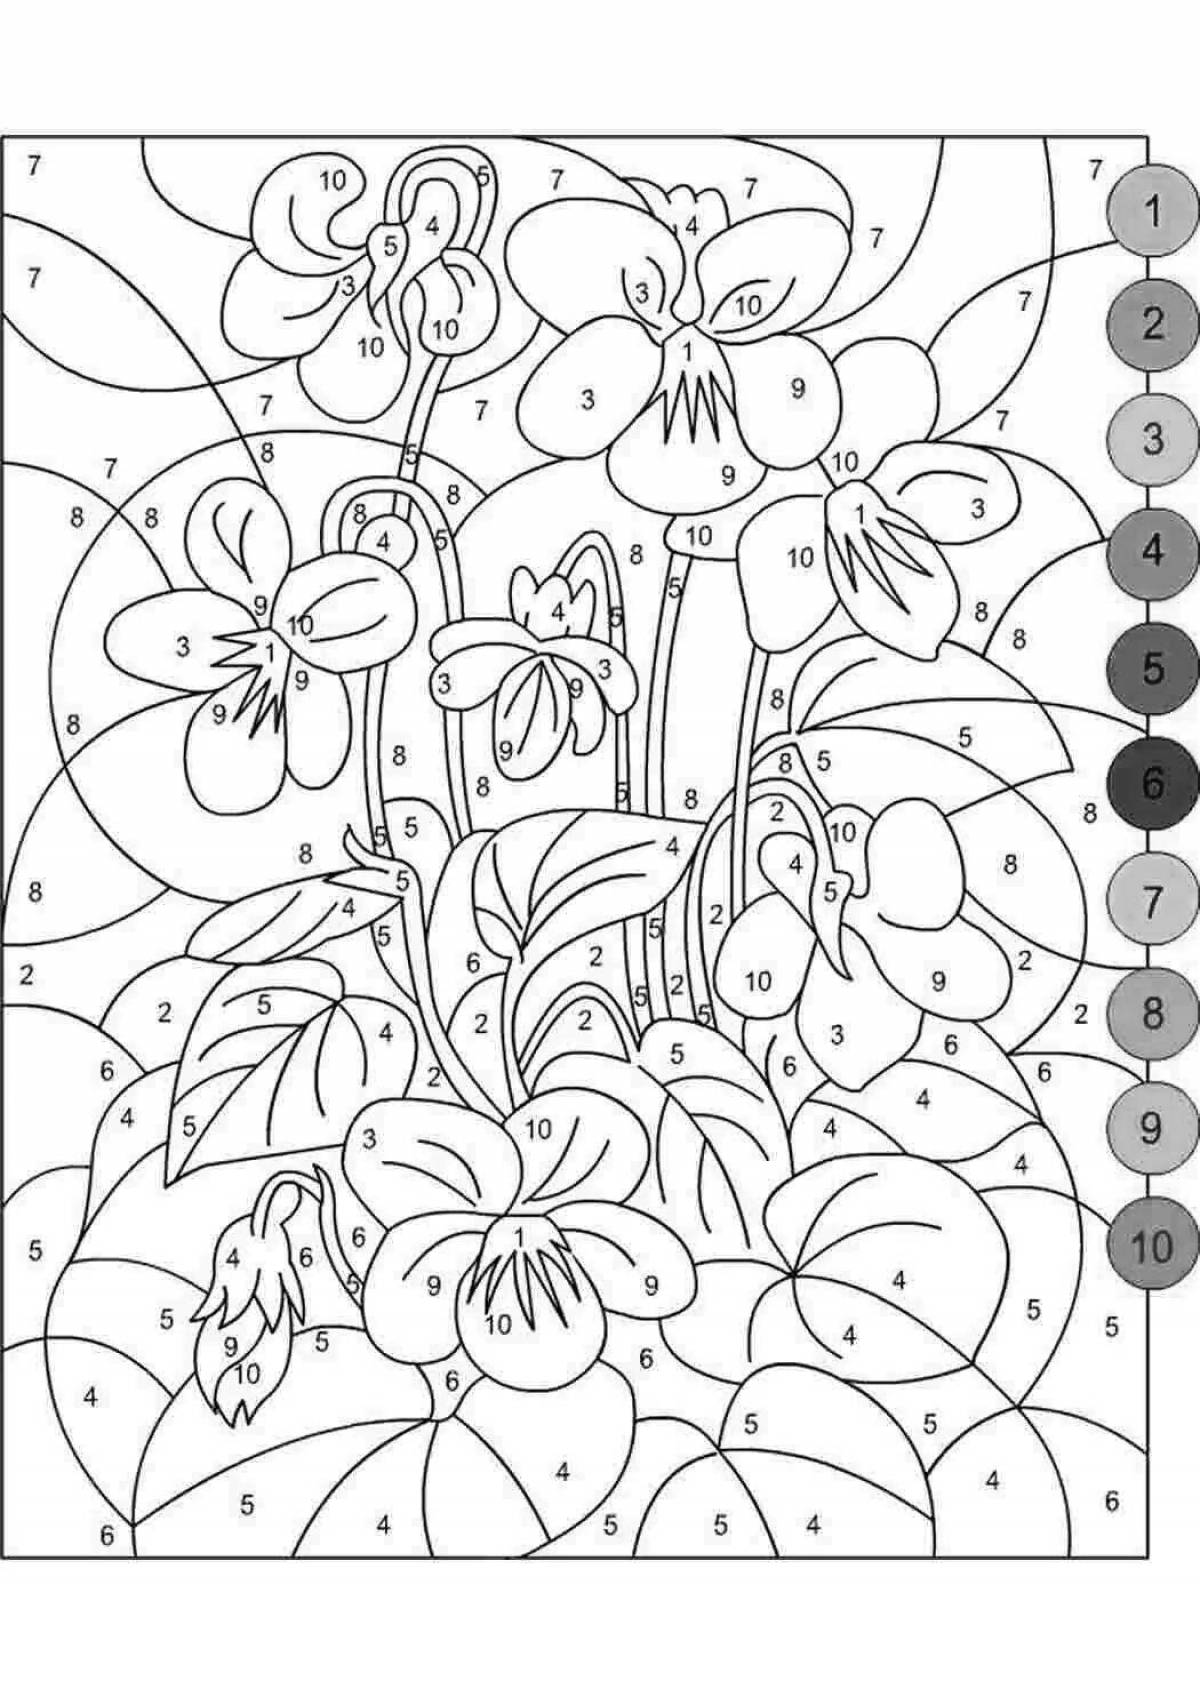 Fun coloring game with strawberry number